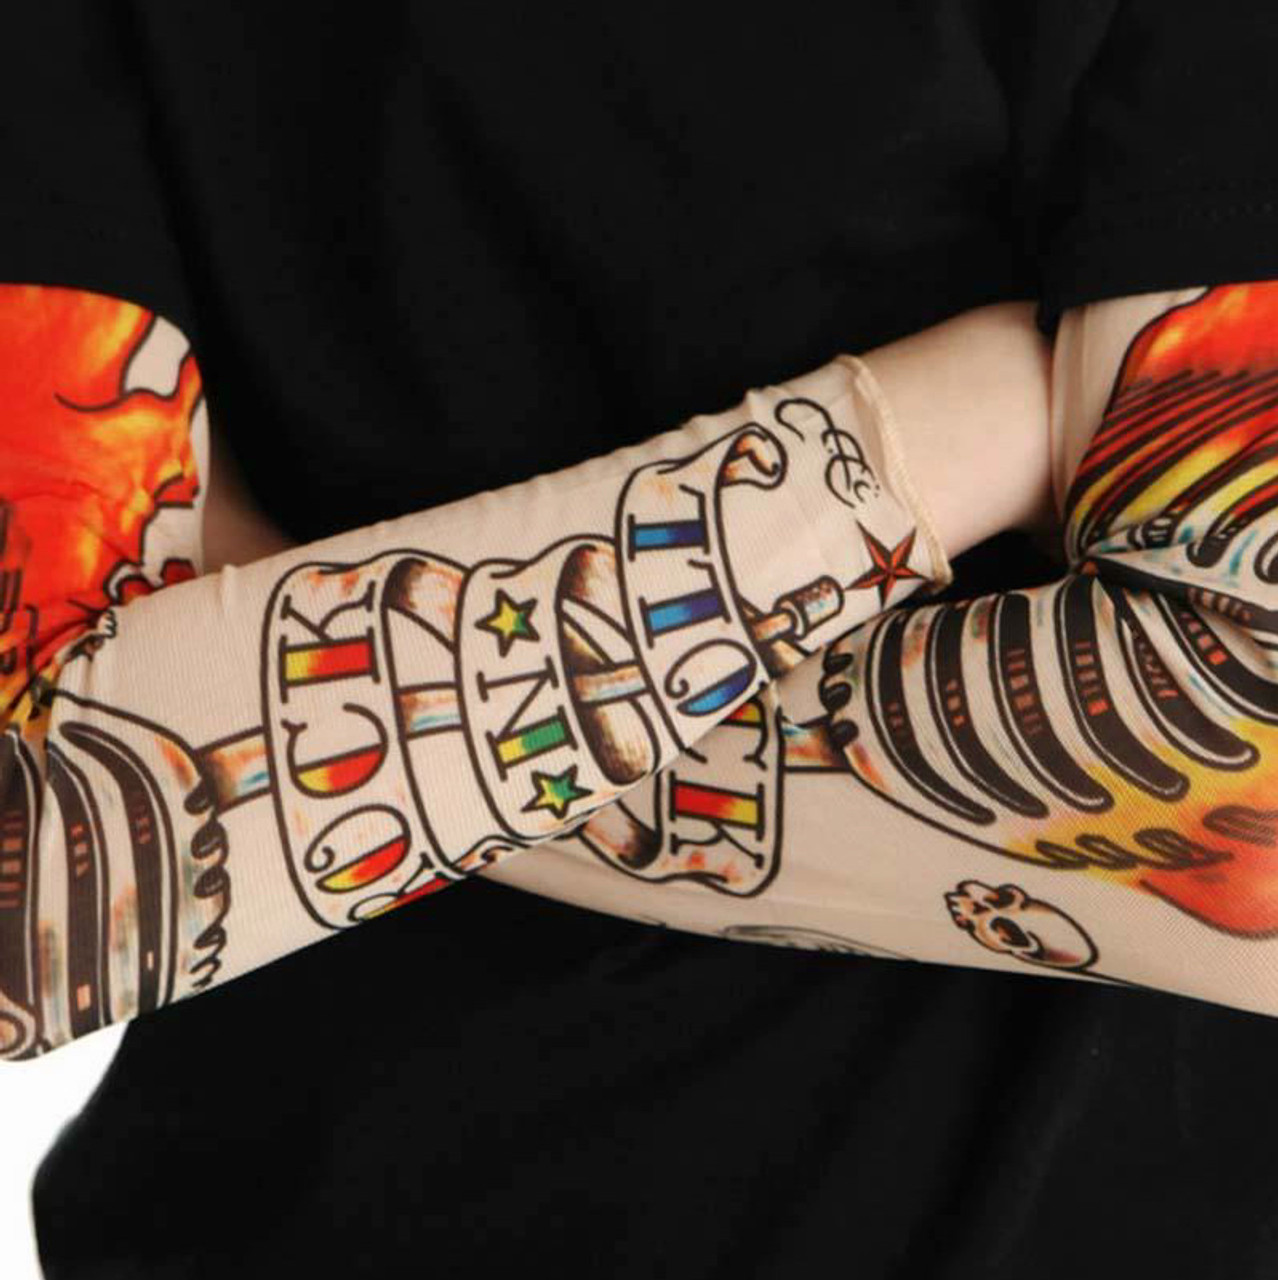 TRIBAL TATTOO SLEEVES - Great Rockstar Accessory! - The Wig Outlet